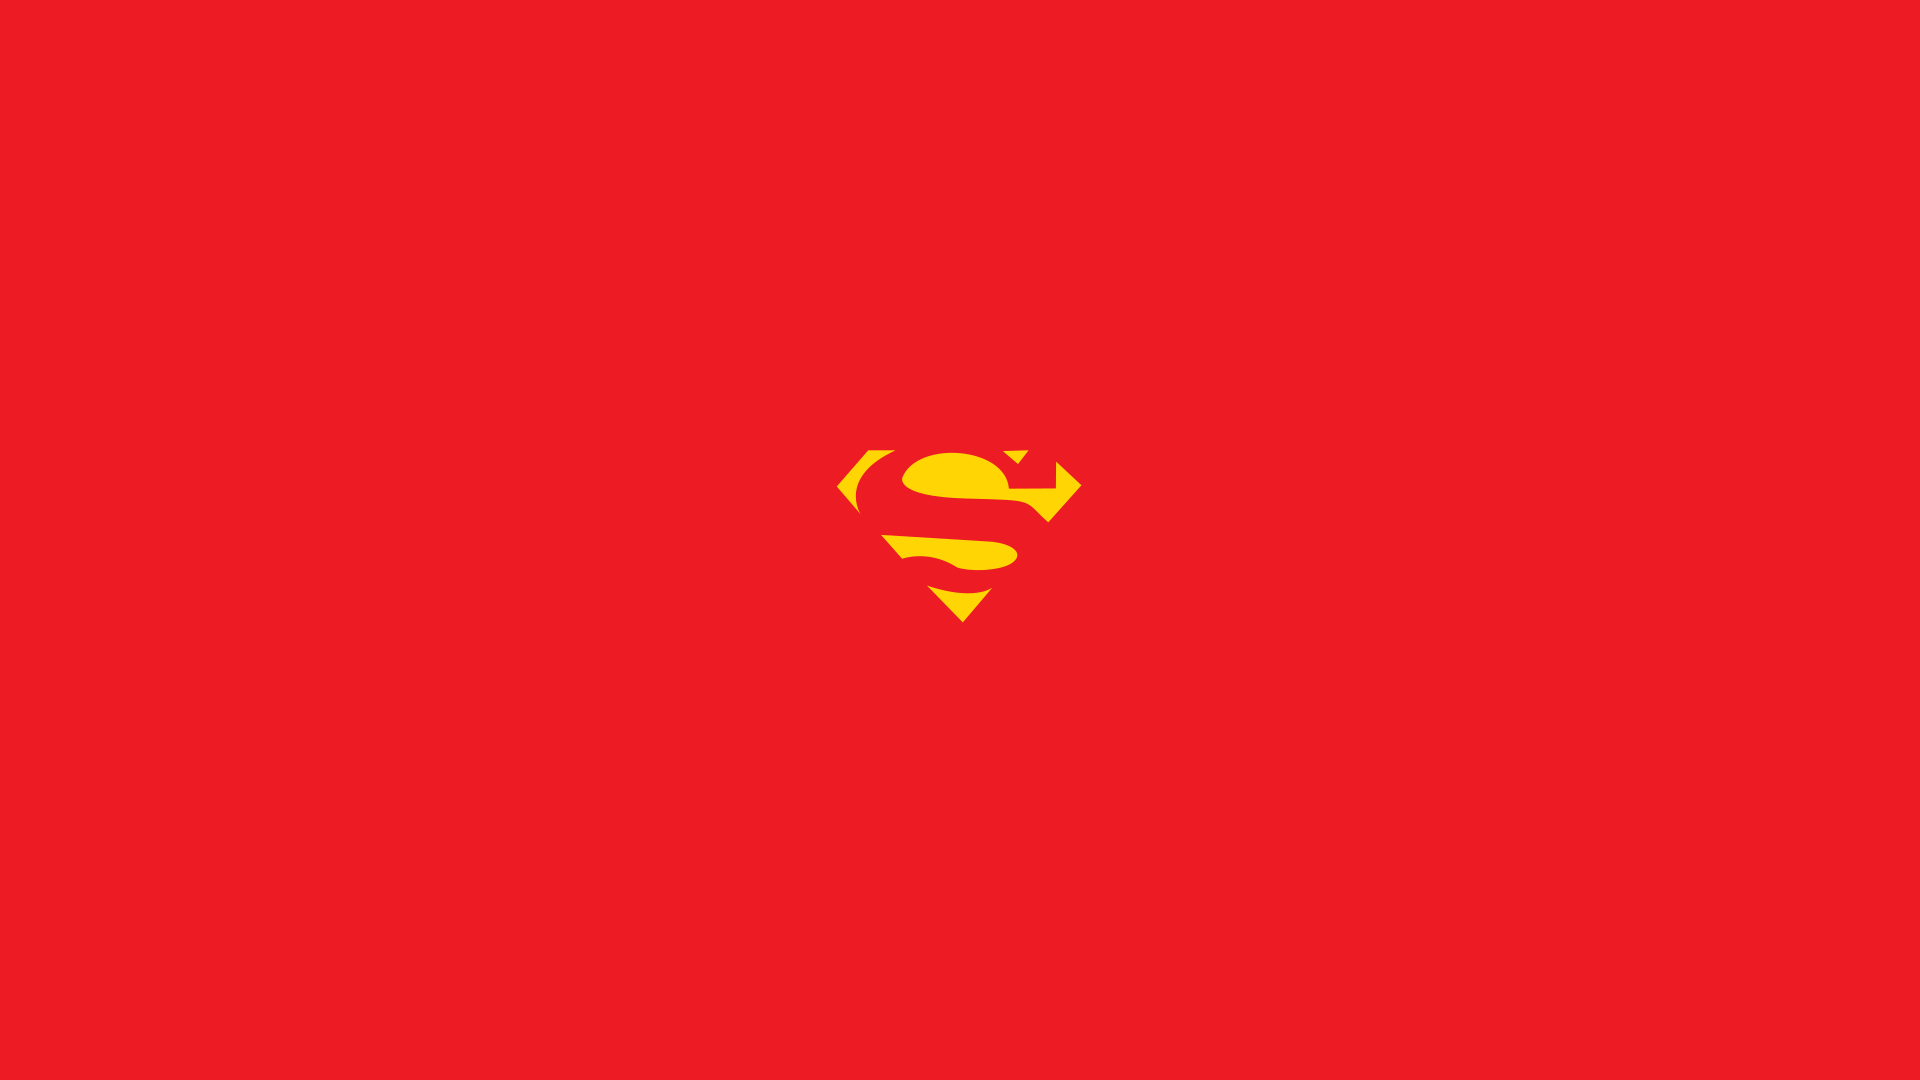 Superman Minimal Logo Wallpaper, HD Minimalist 4K Wallpapers, Images,  Photos and Background - Wallpapers Den